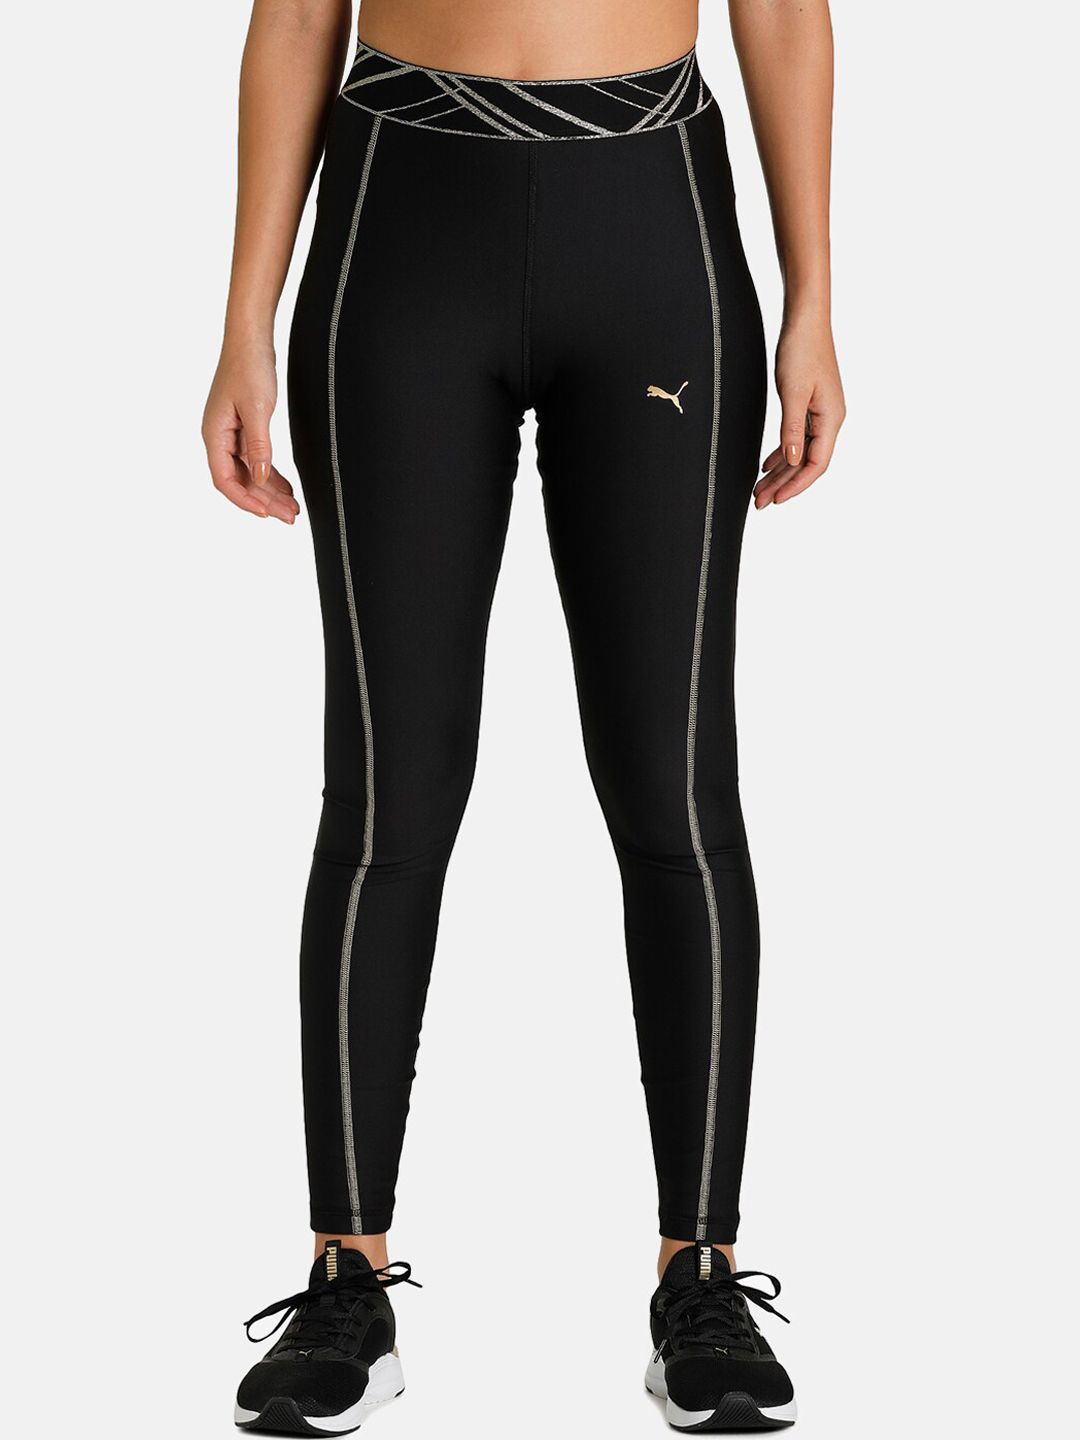 Puma Women Black Solid Deco Glam High Waist Full-Length Training Tights Price in India